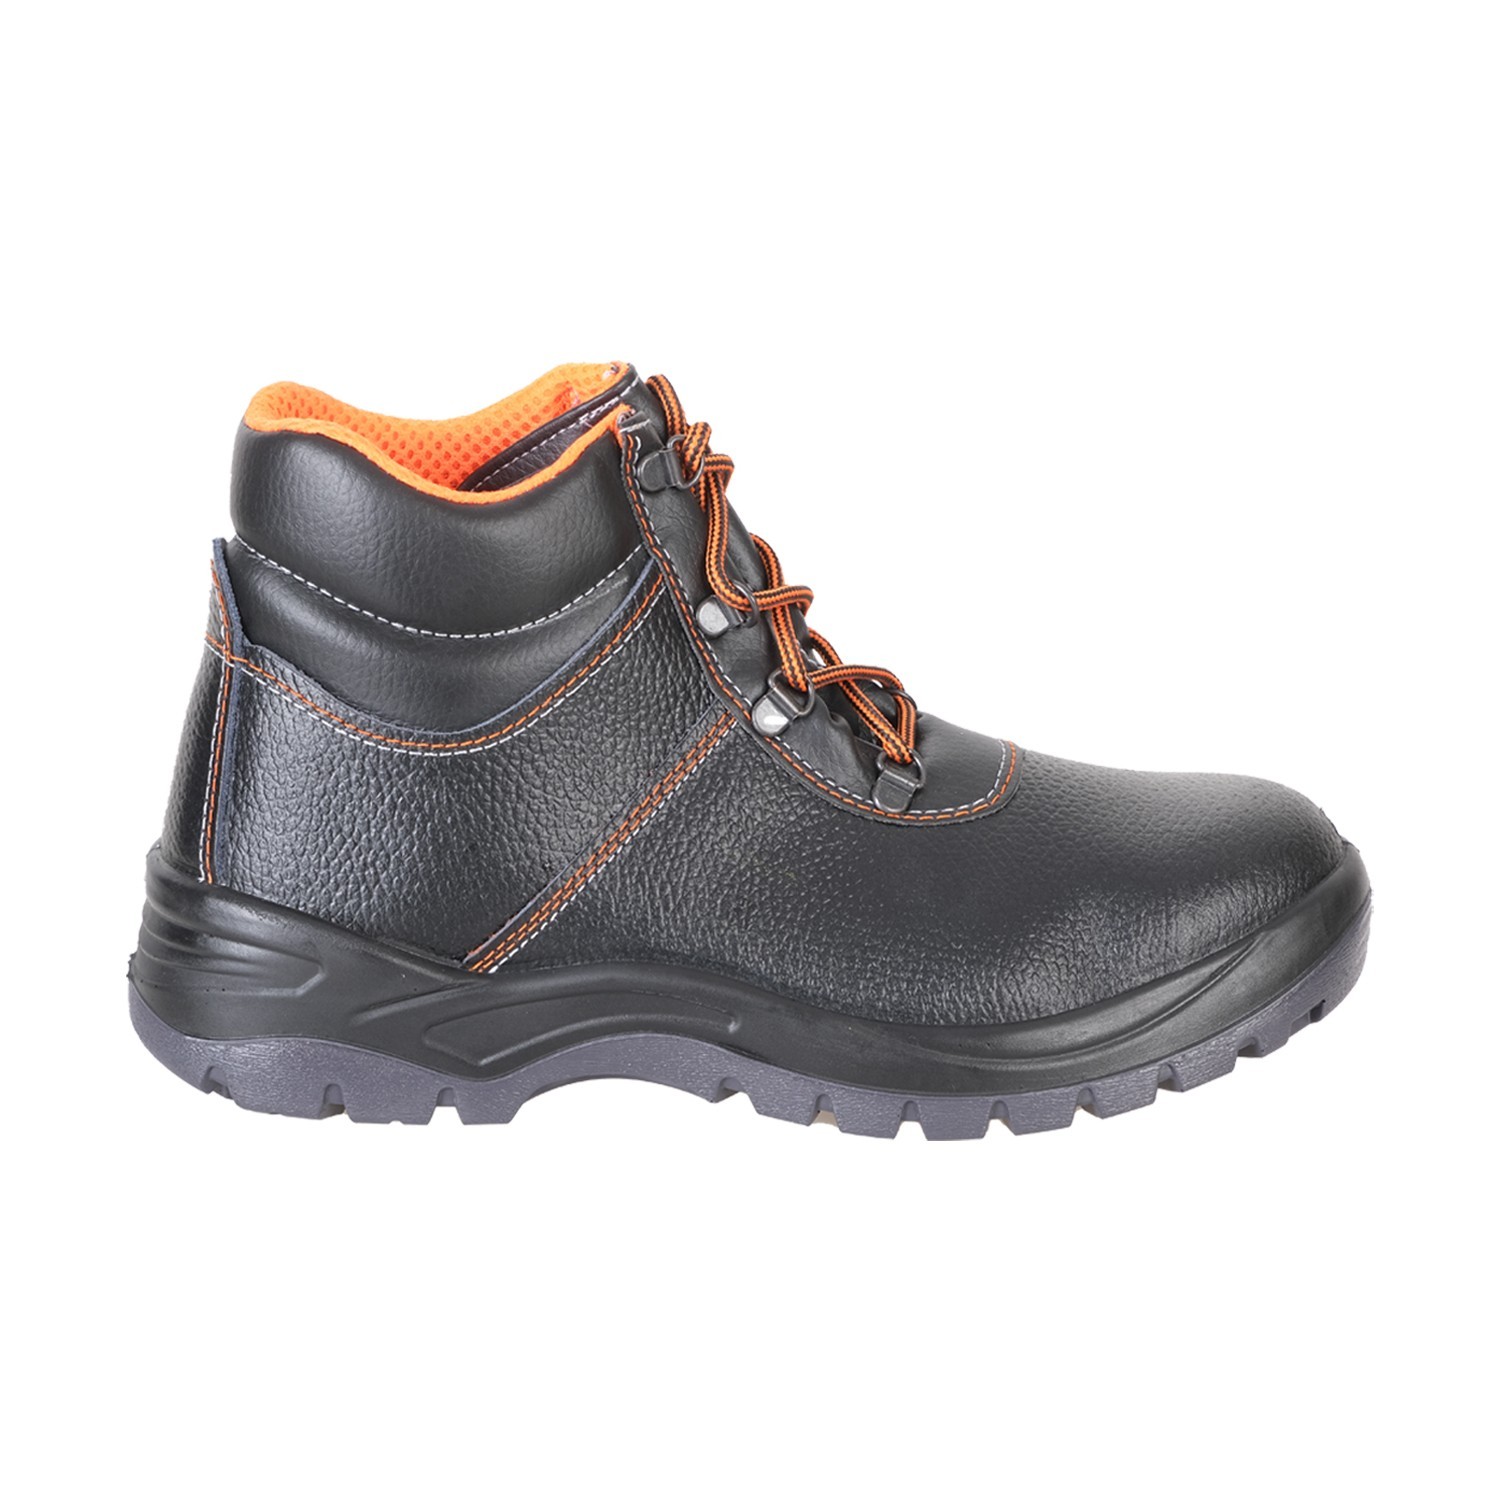 Mekap 023 R Leather S2 Safety Boot